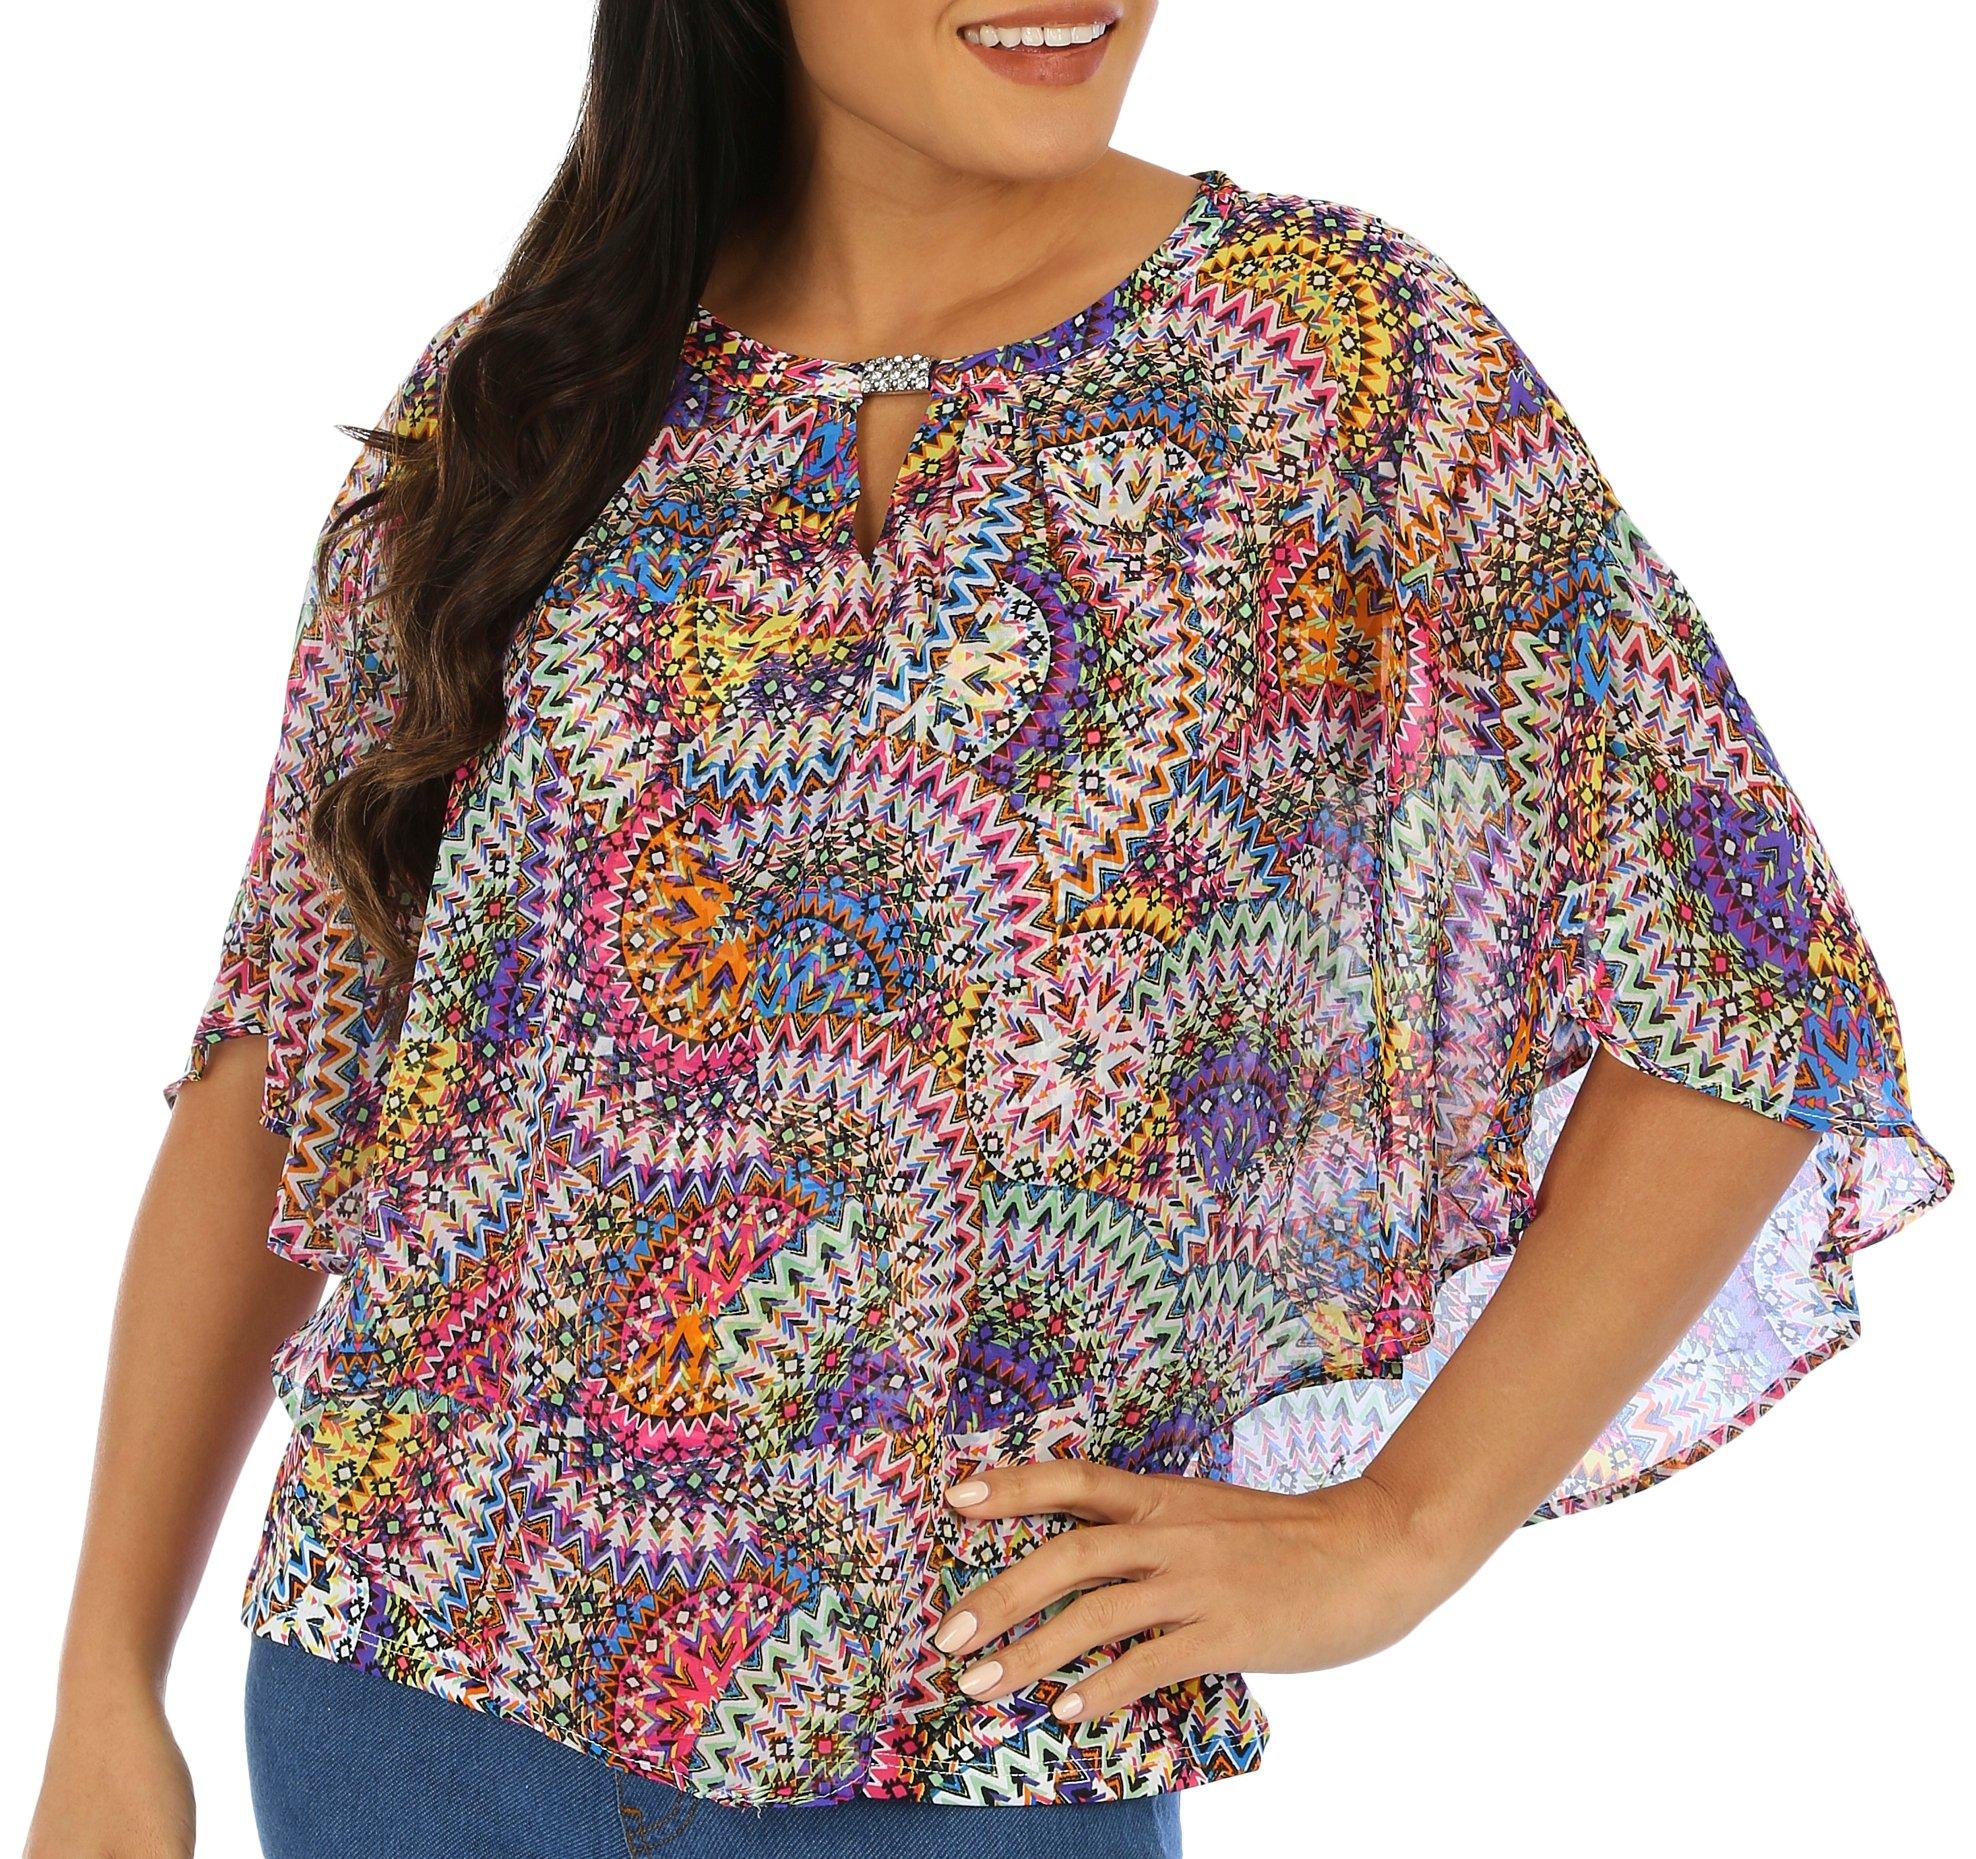 Juniper + Lime Womens Abstract Print Embellished Poncho Top